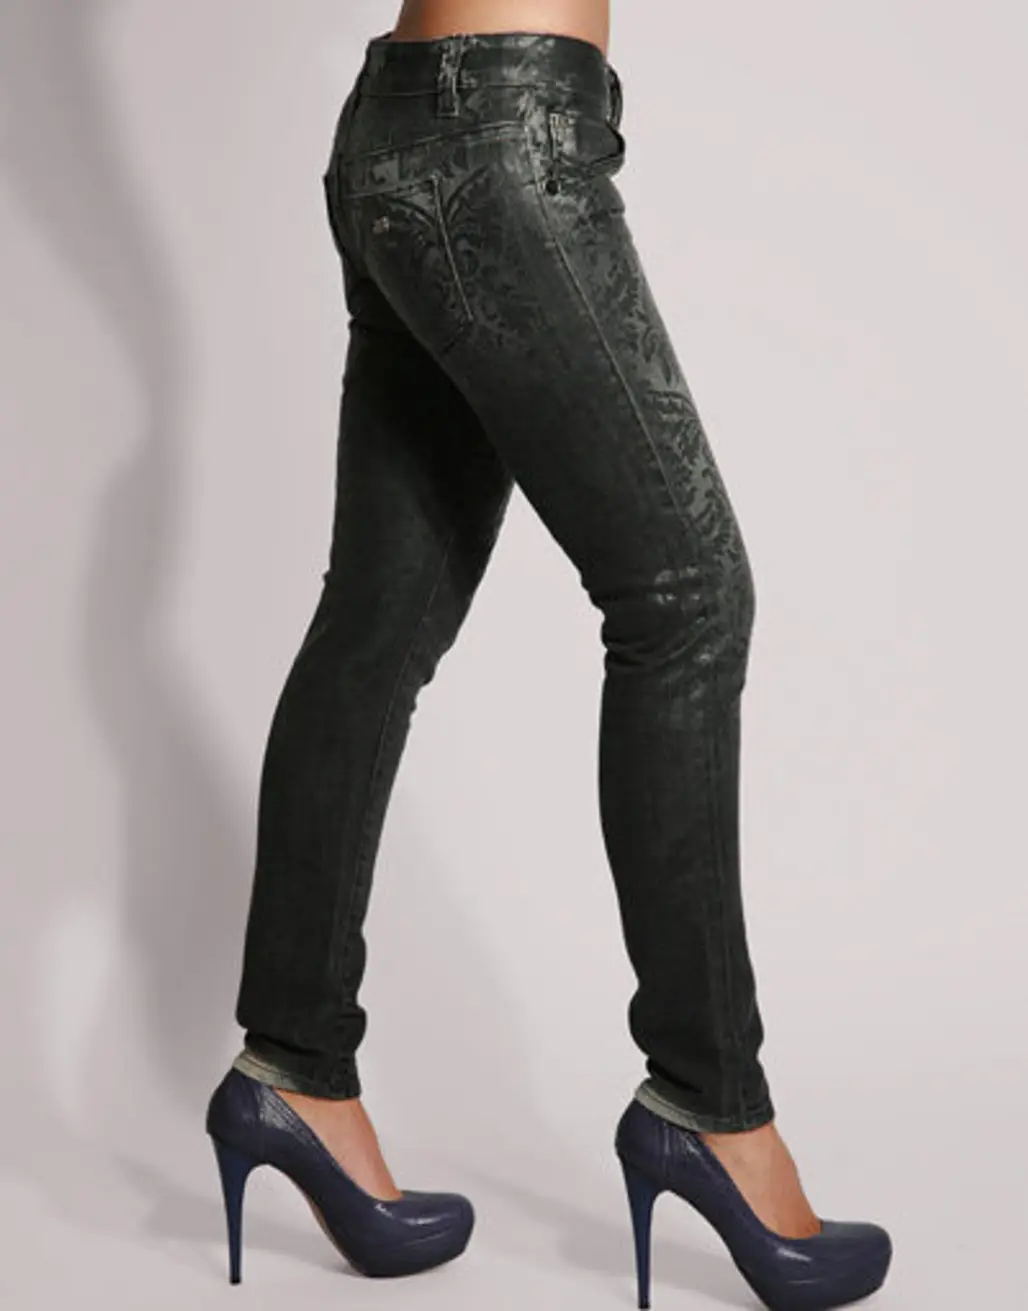 Miss Sixty Lace Print Jeans